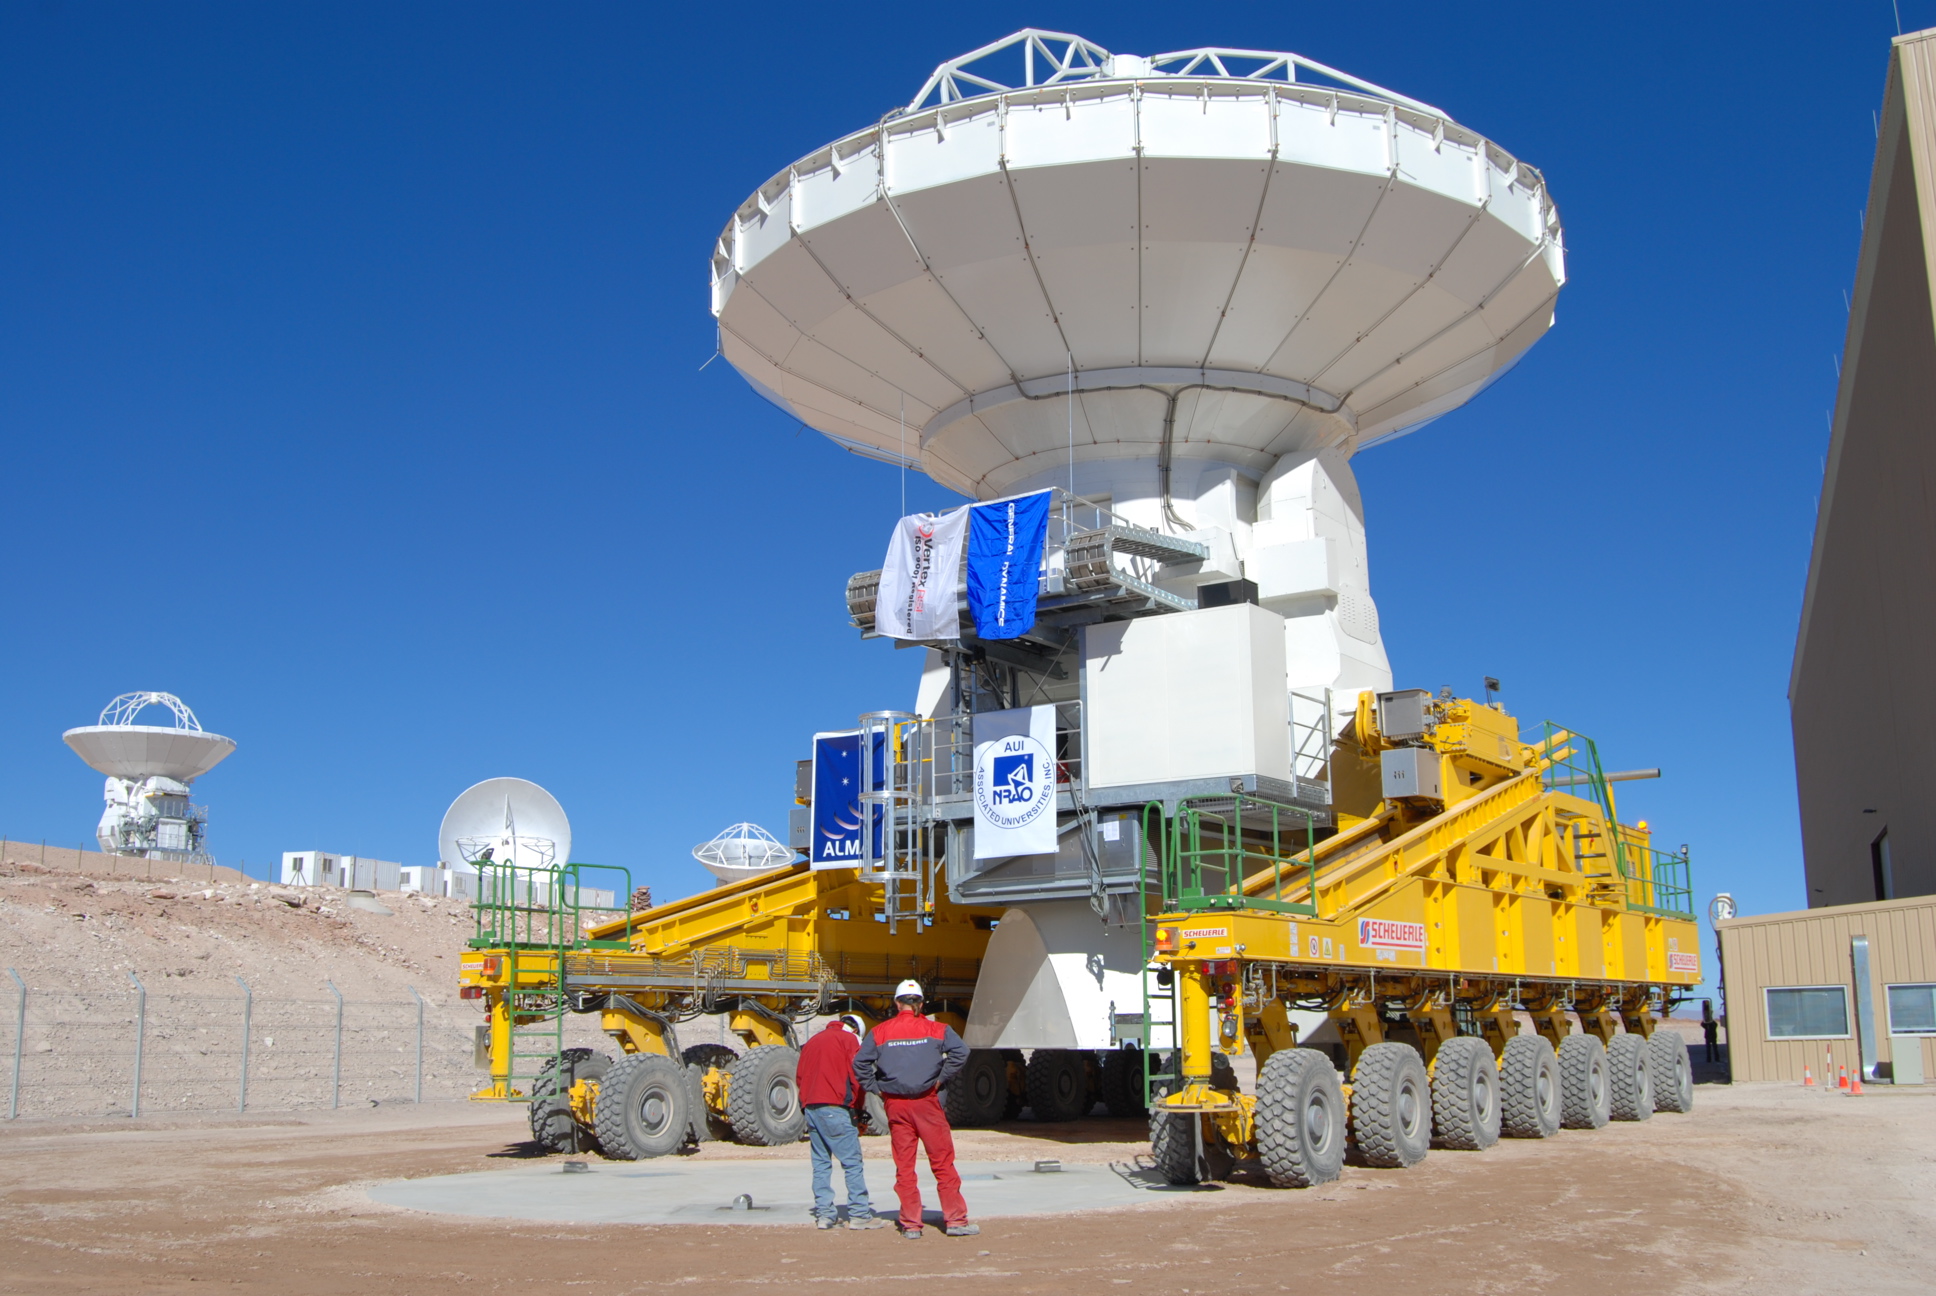 VertexRSI2 moved from SEF to antenna station by ALMA Transporter